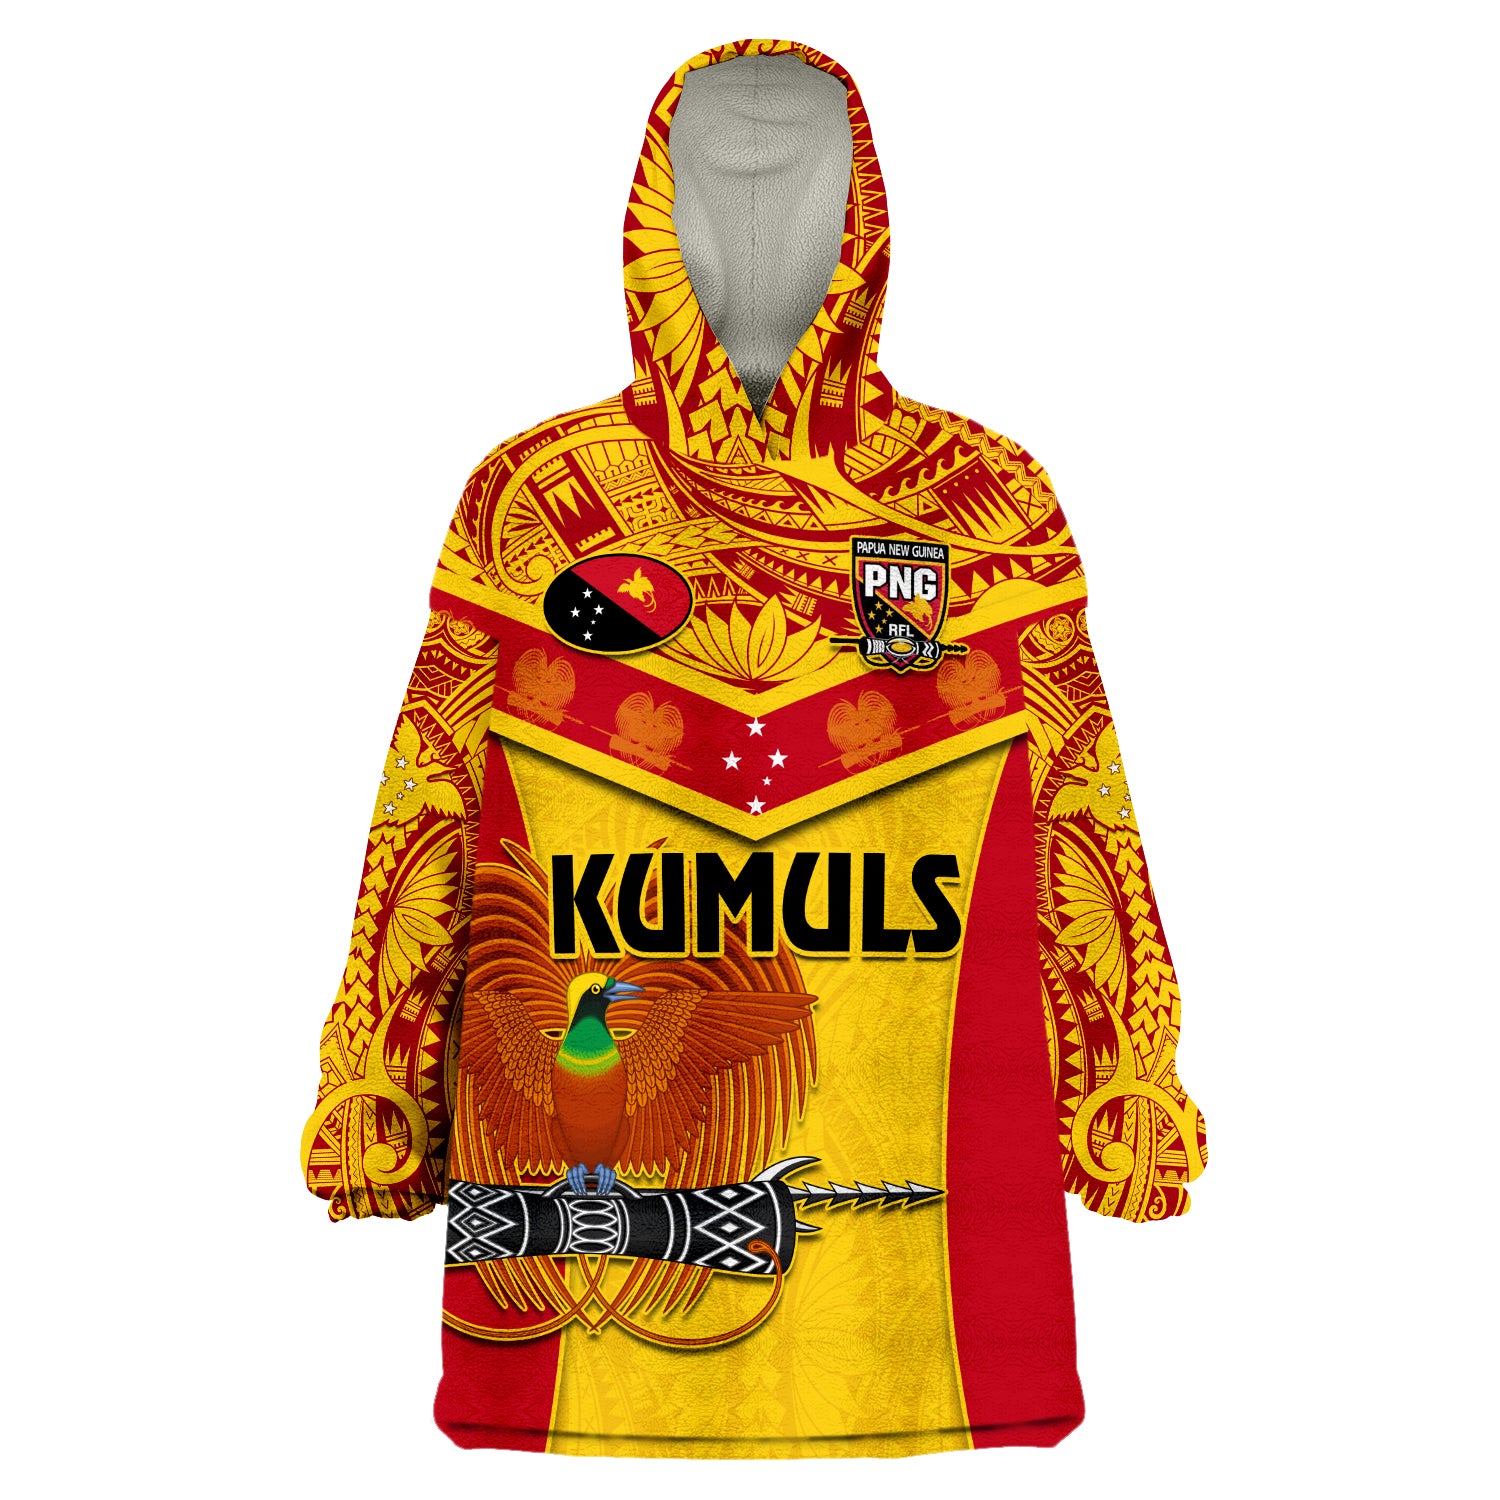 (Custom Text And Number) Papua New Guinea Rugby PNG Kumuls Bird Of Paradise Yellow Wearable Blanket Hoodie LT14 Unisex One Size - Polynesian Pride